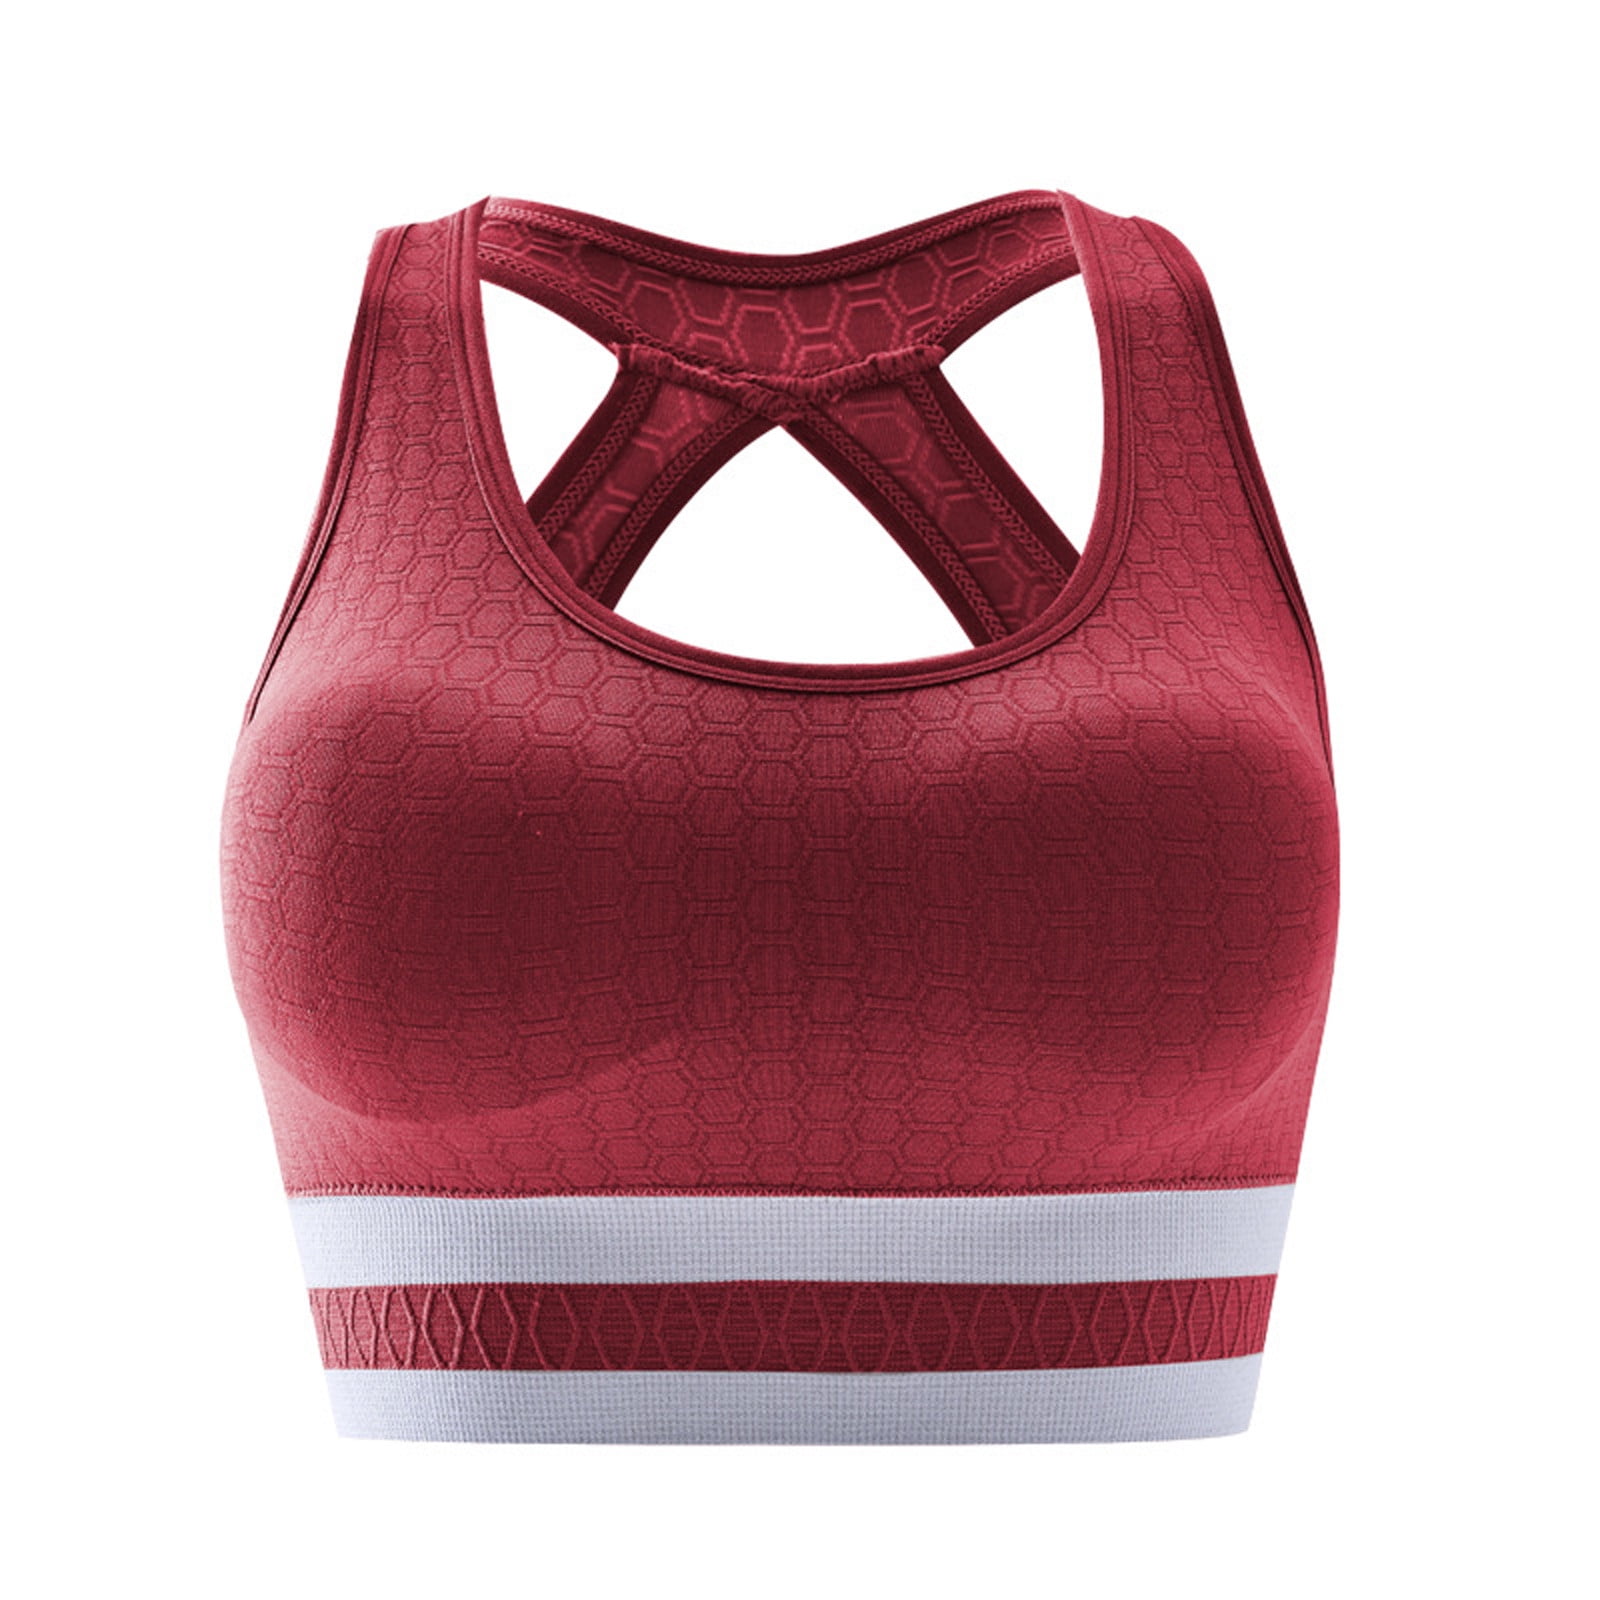 Wireless Seamless Yoga Crop Top For Women Padded Short Sleeve Sports Bra  For Gym, Running, Dance And Fitness From Hebaohua, $20.5